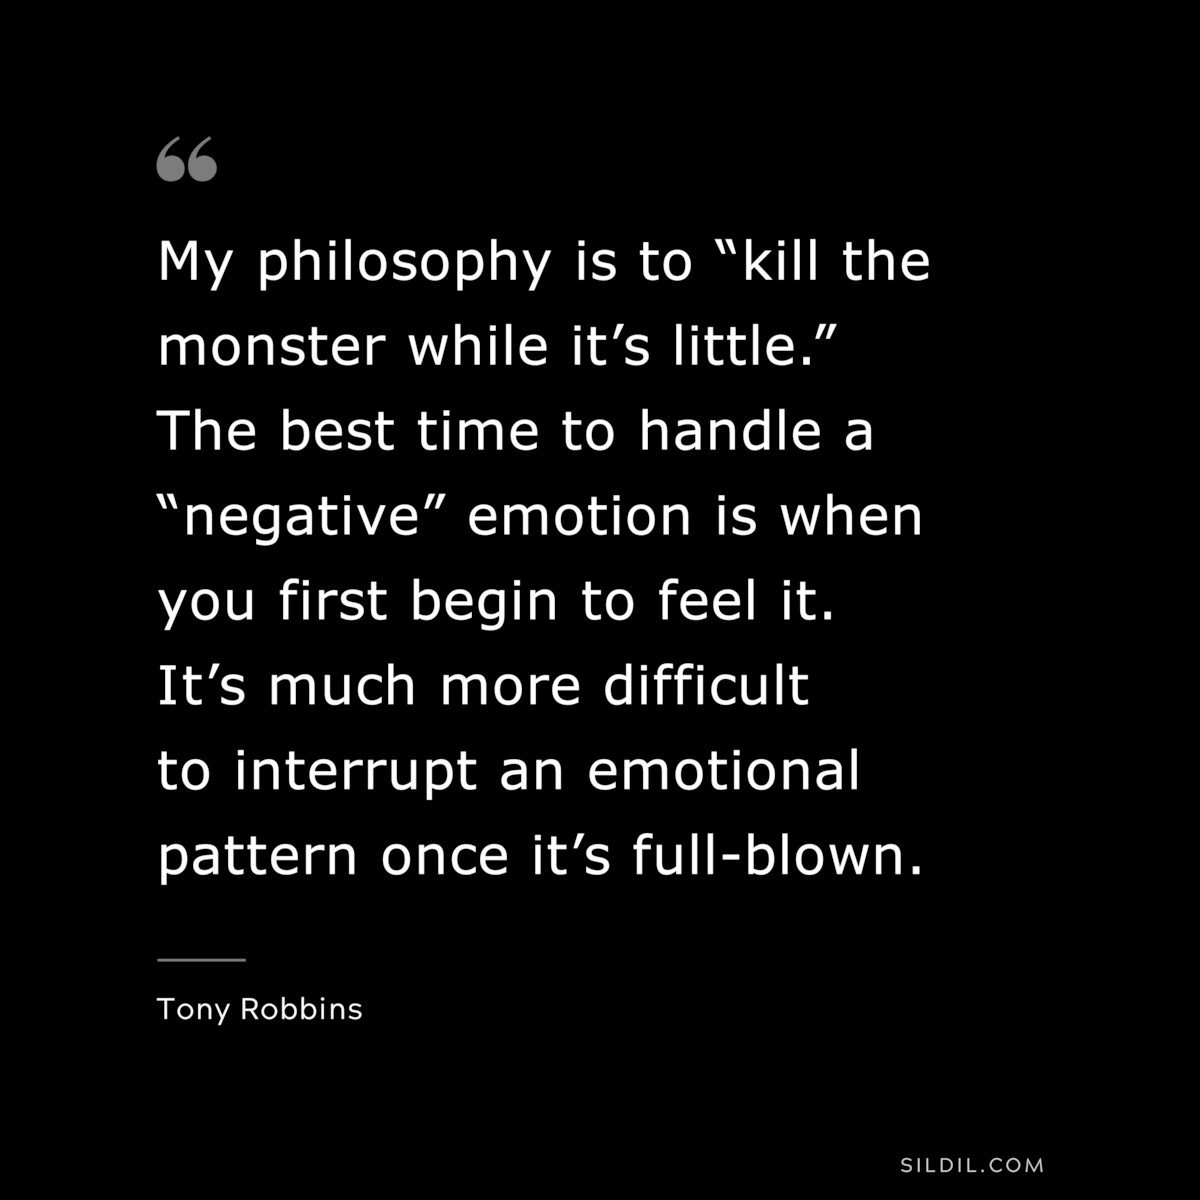 My philosophy is to “kill the monster while it’s little.” The best time to handle a “negative” emotion is when you first begin to feel it. It’s much more difficult to interrupt an emotional pattern once it’s full-blown. ― Tony Robbins